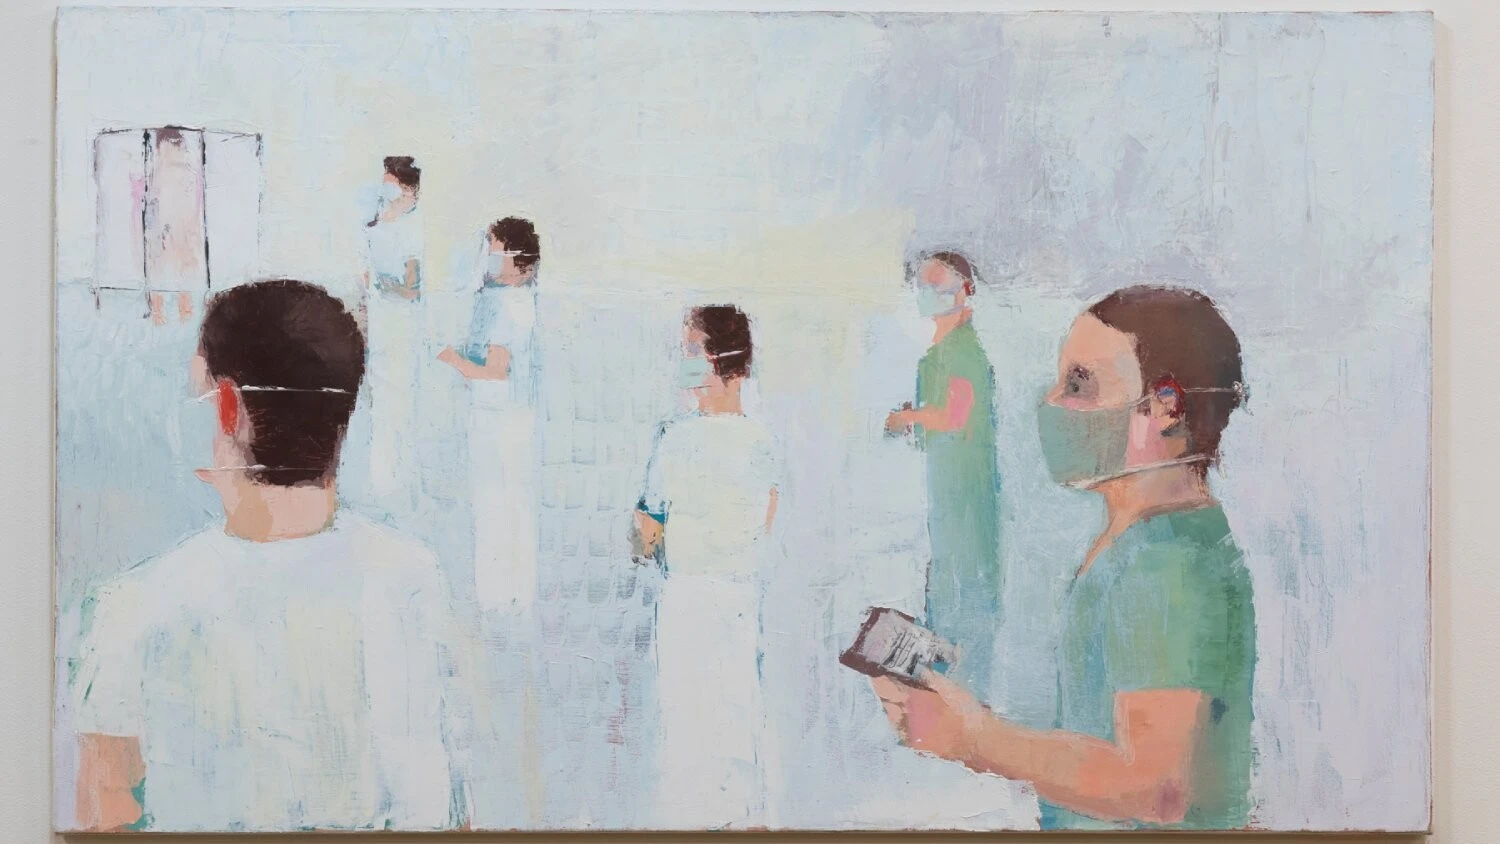 An abstract painting shows medical staff and patient wearing masks